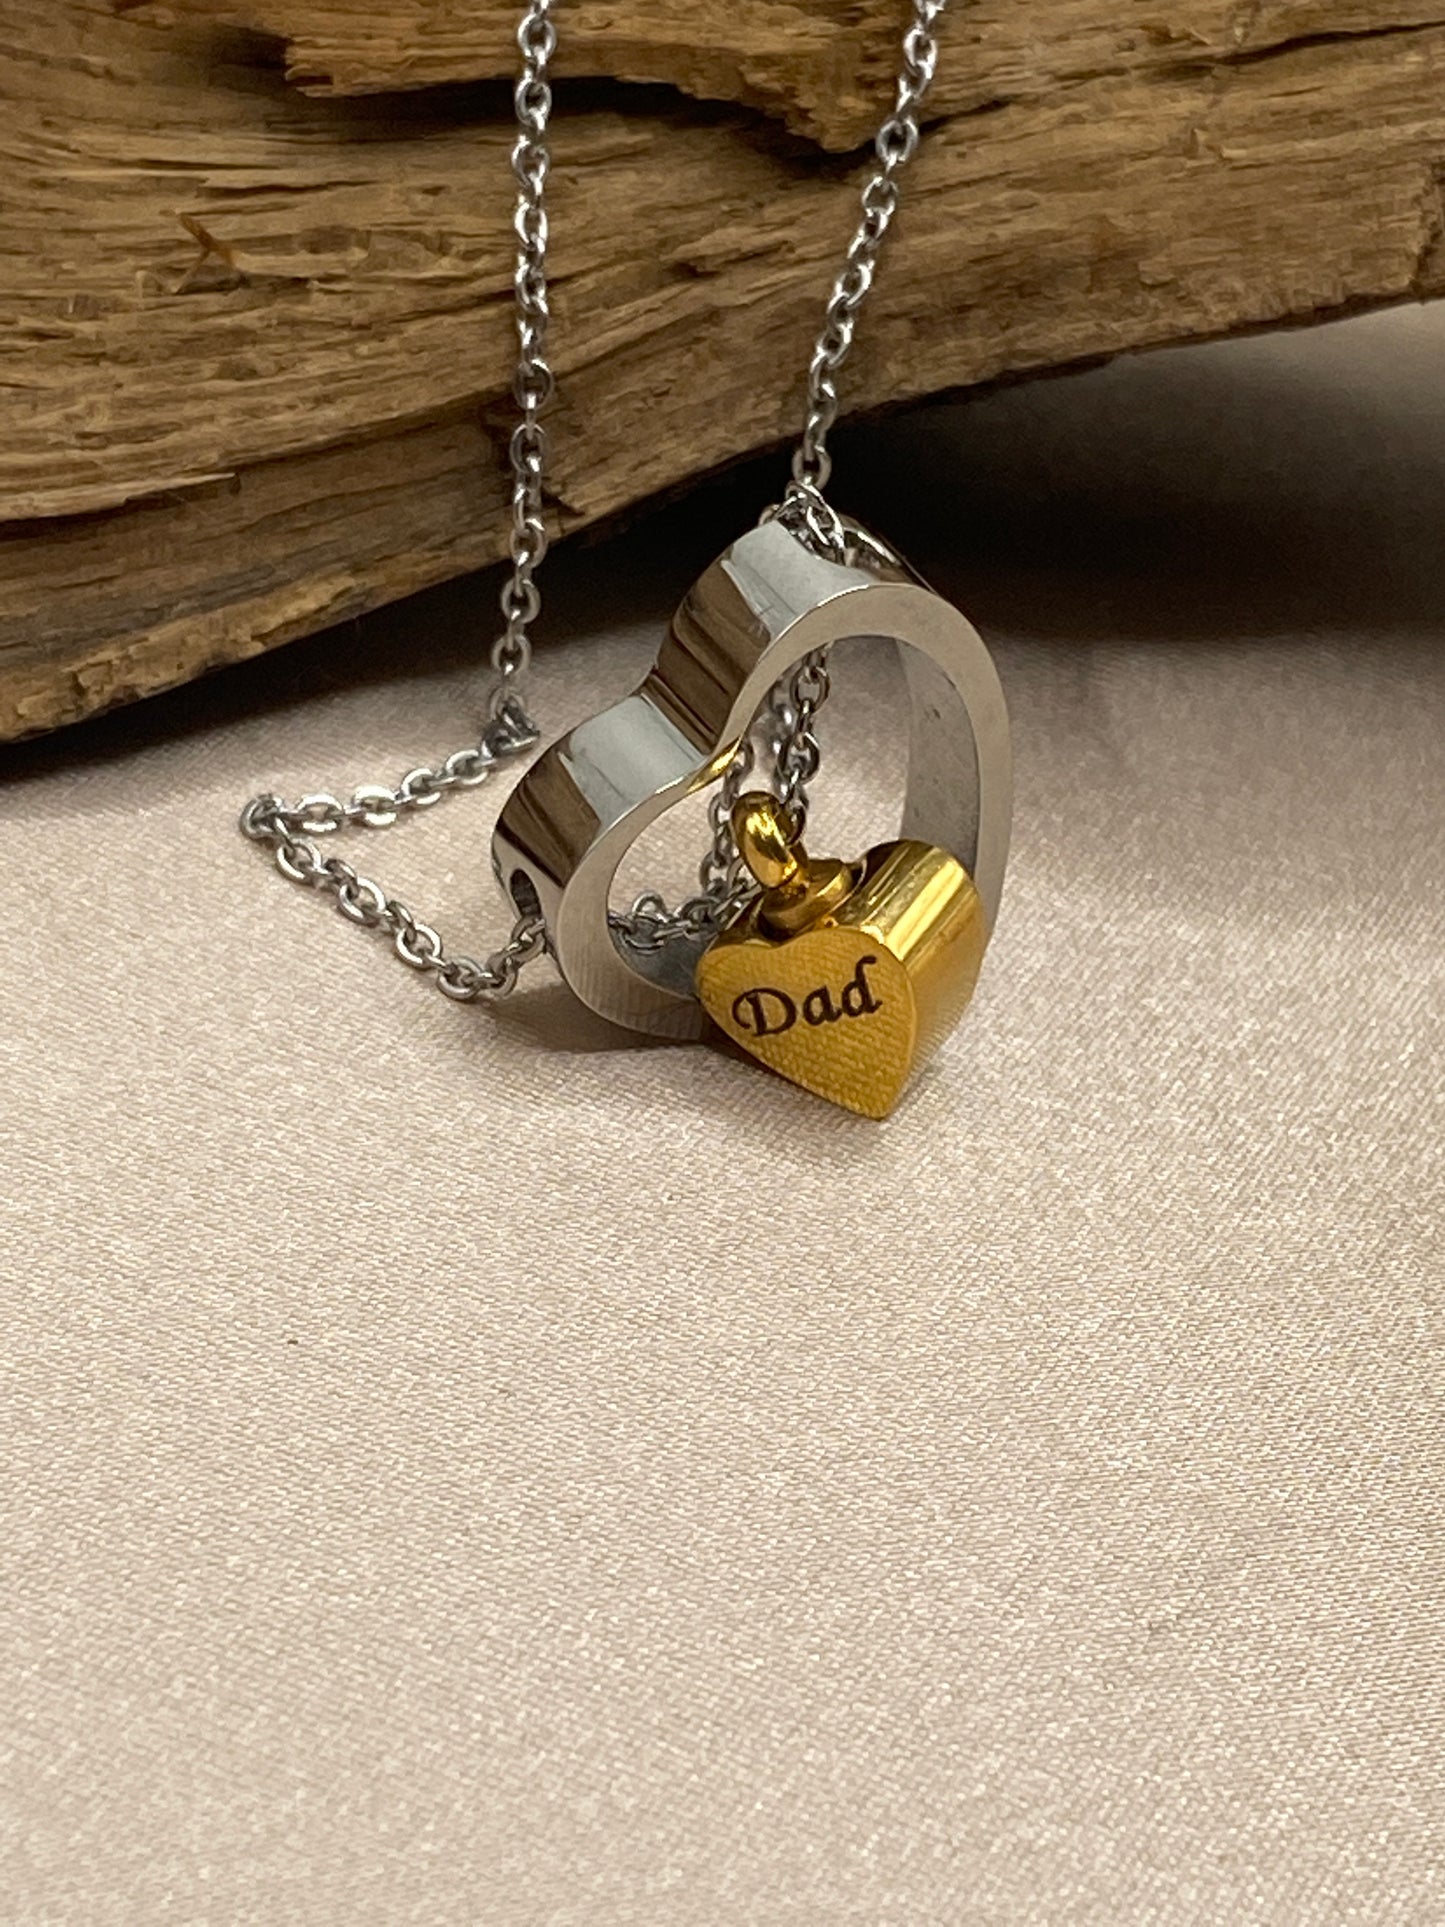 Double Heart Cremation Urn Necklace - Silver and Gold Heart with 'Dad' Engraved, Stainless Steel Memorial Jewelry for Men and Women, Loss of Father Remembrance